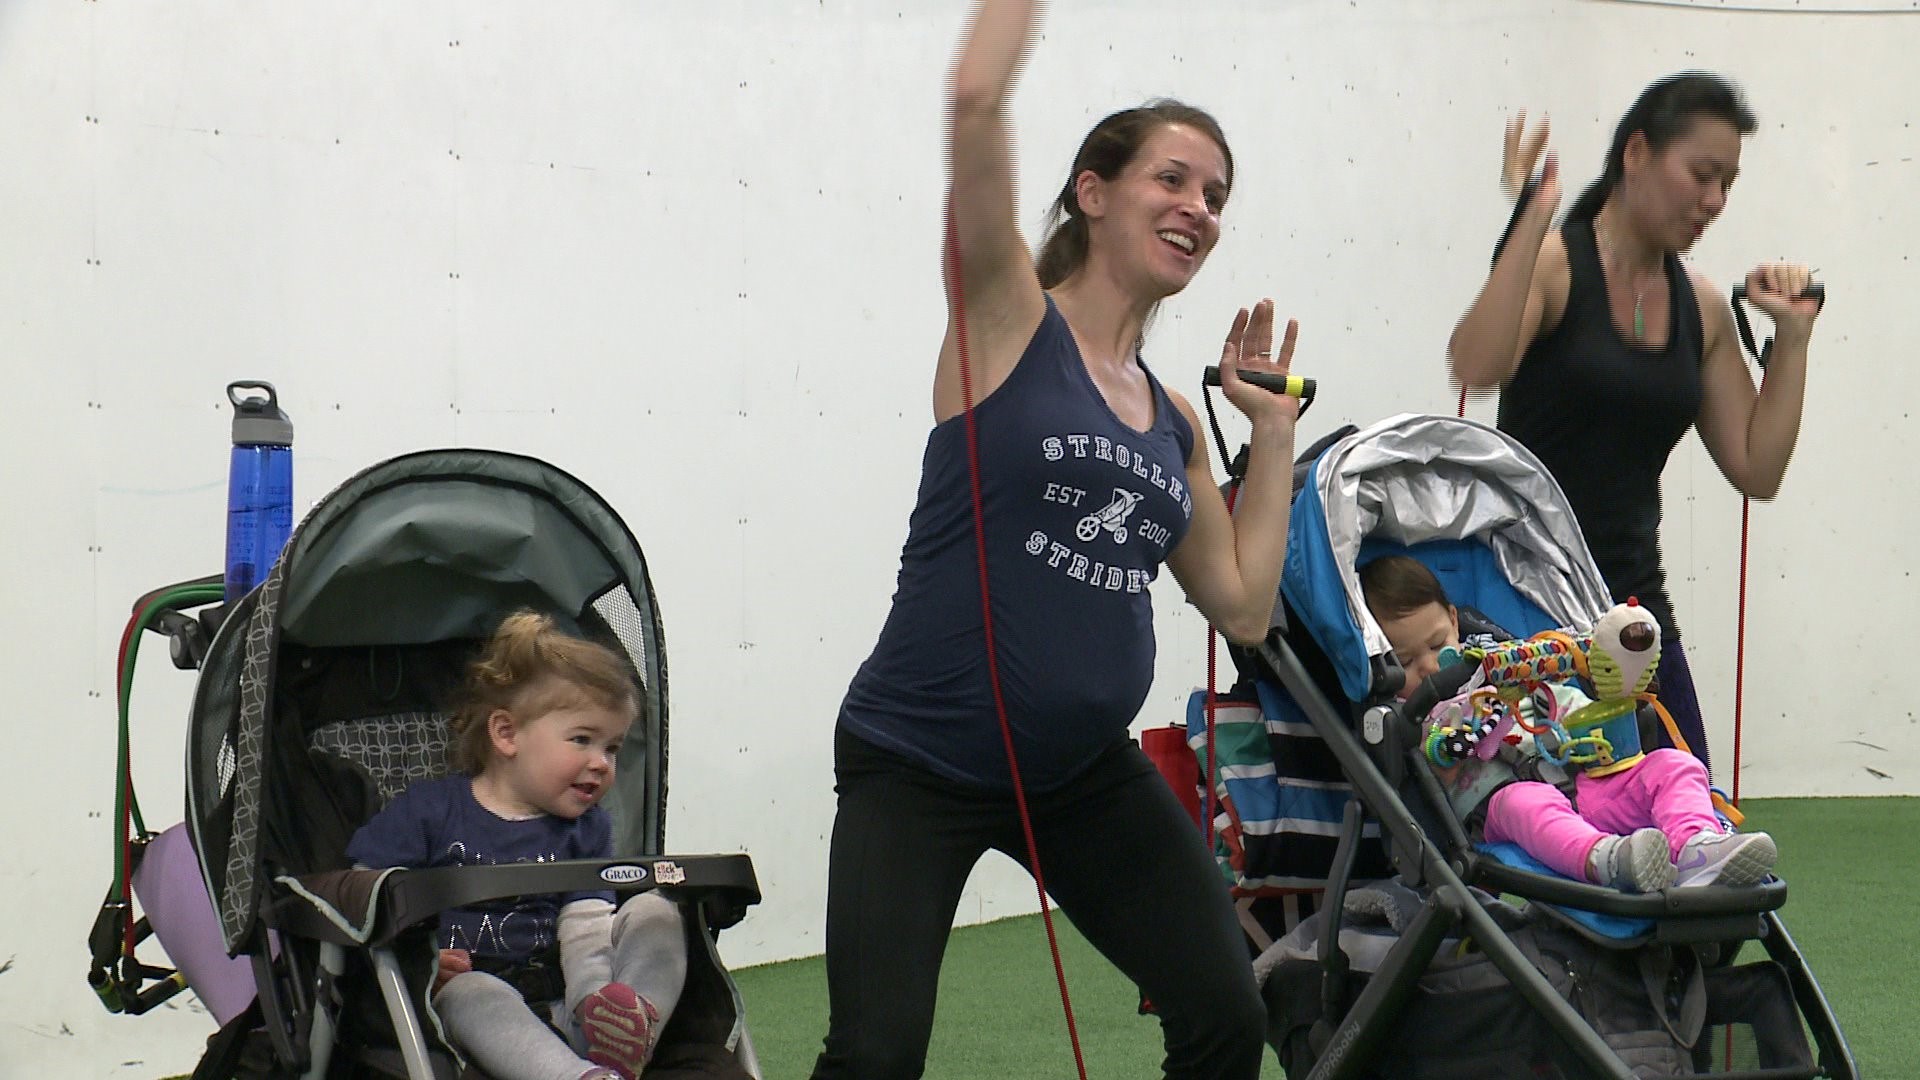 Kelly Ried, owner of FIT4MOM DC shares some exercises that are great for all parents but are especially helpful for new moms.